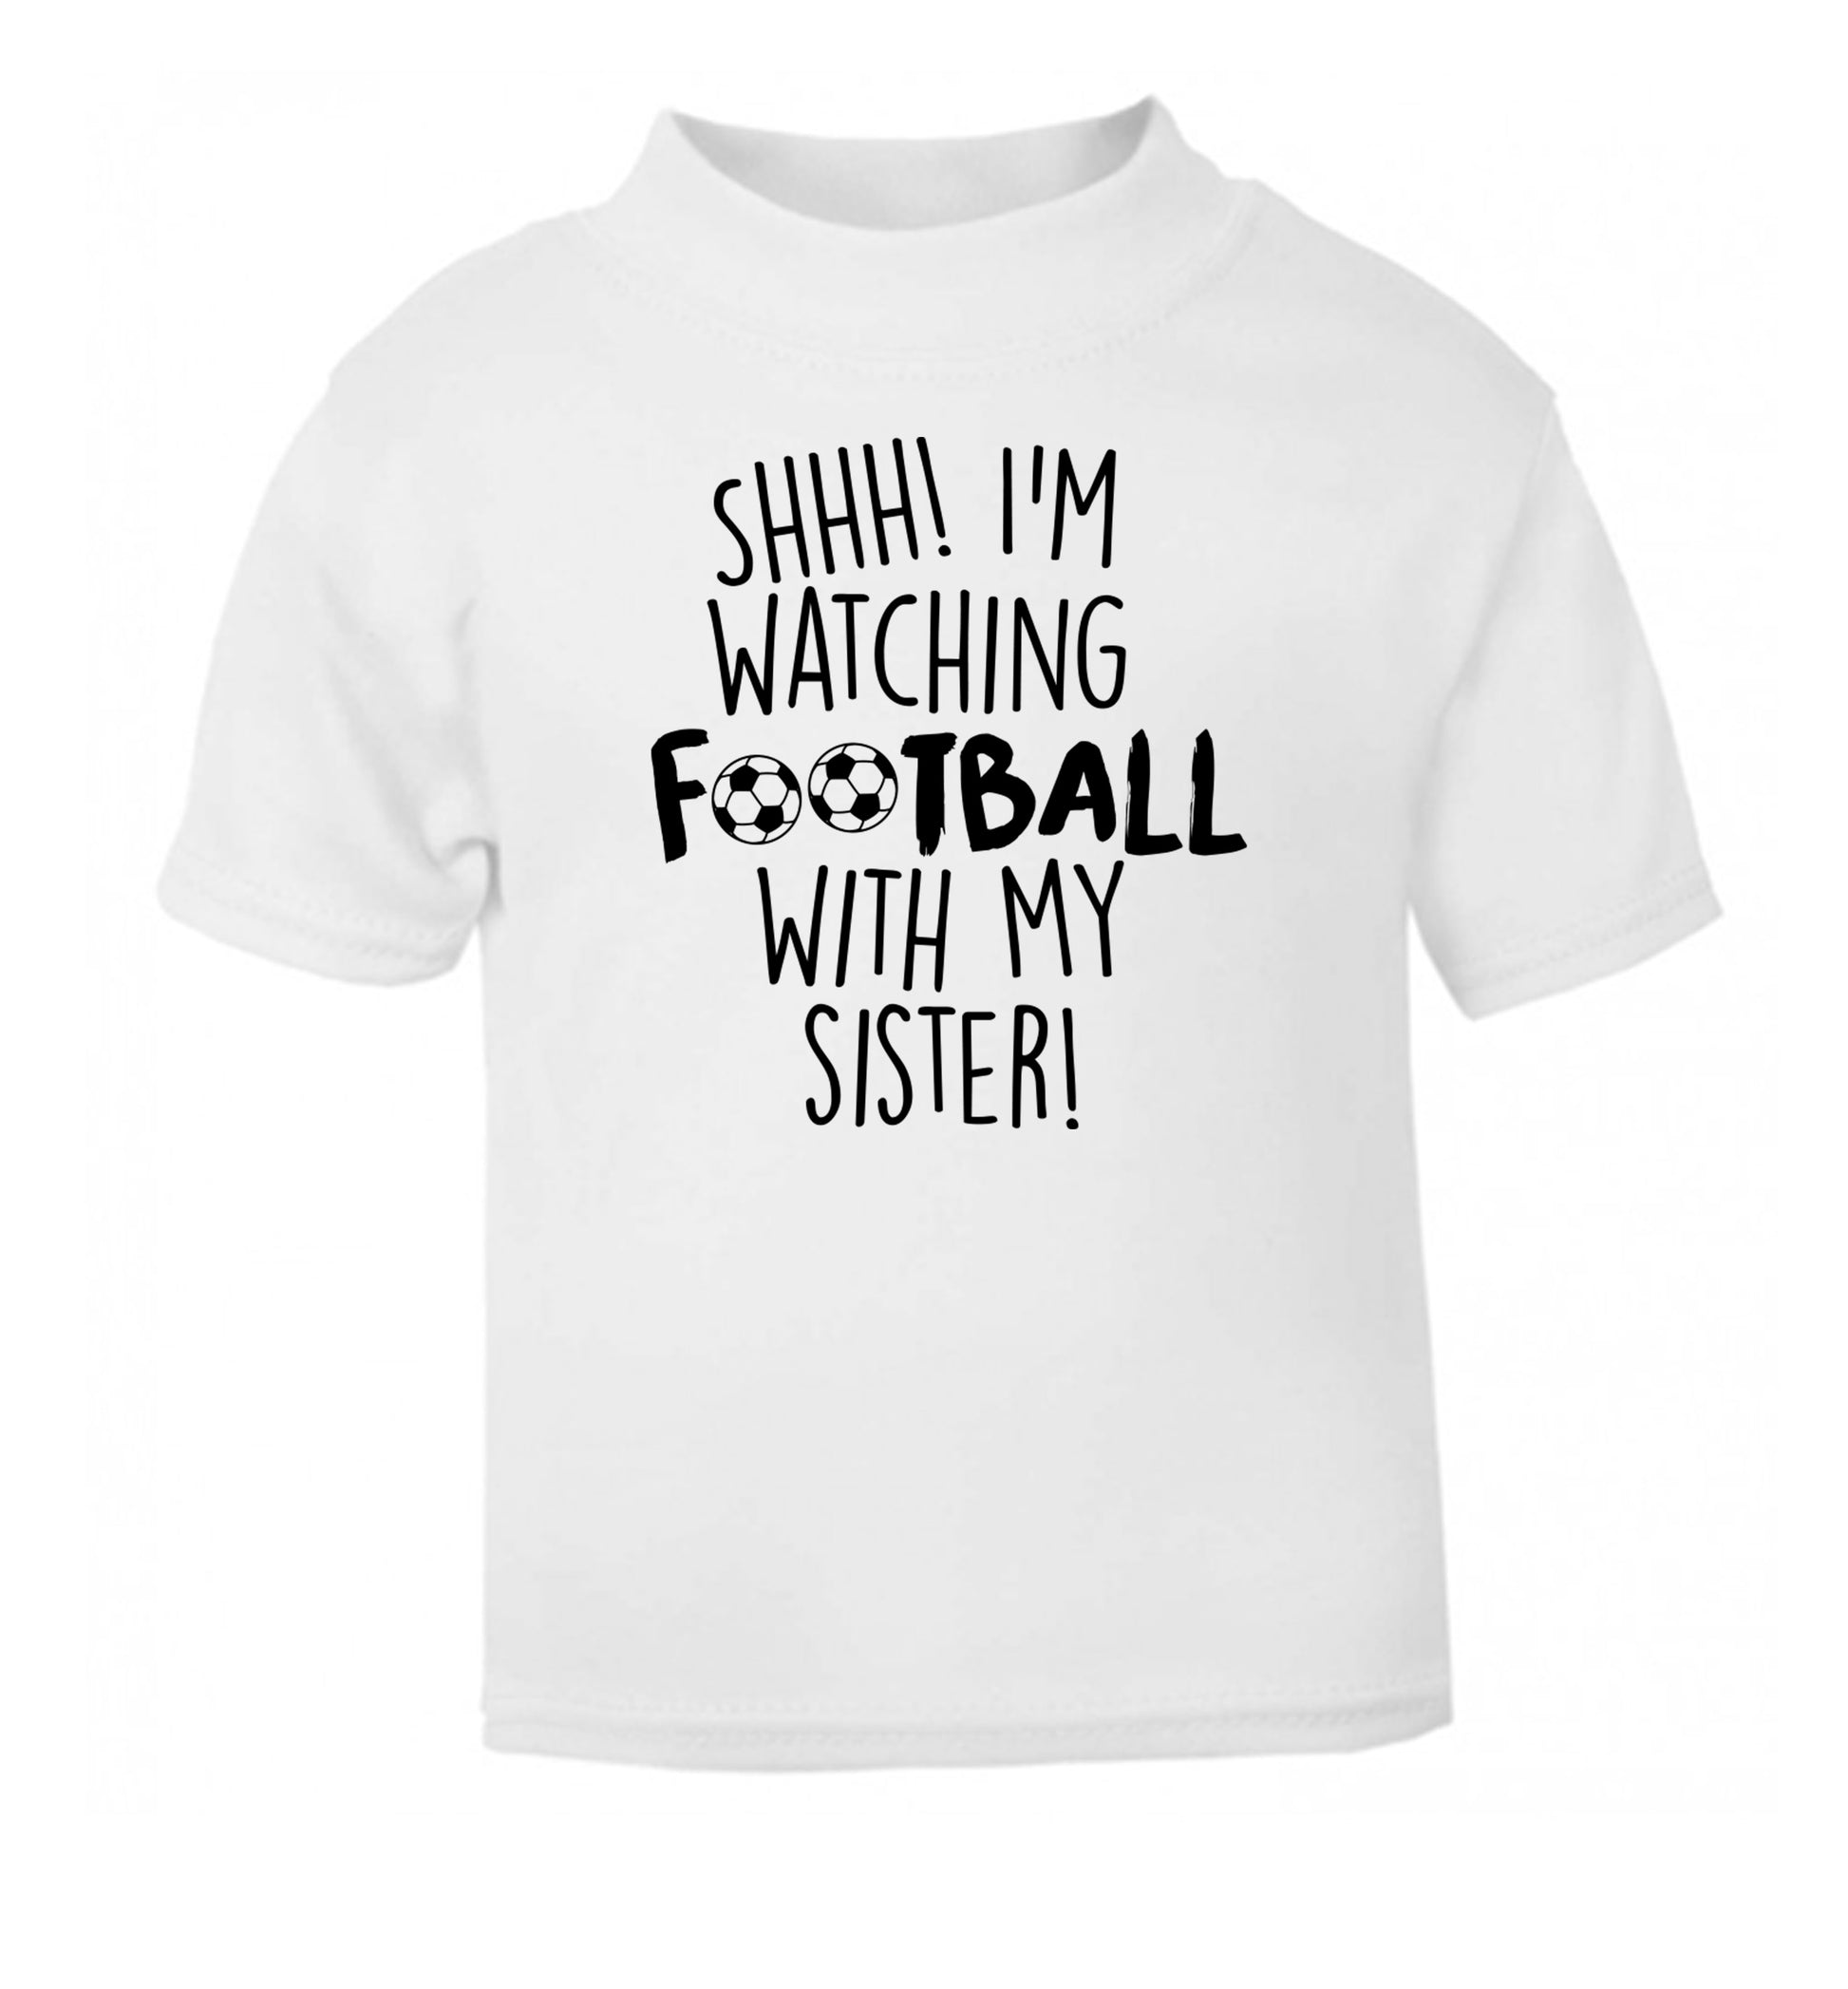 Shhh I'm watching football with my sister white Baby Toddler Tshirt 2 Years